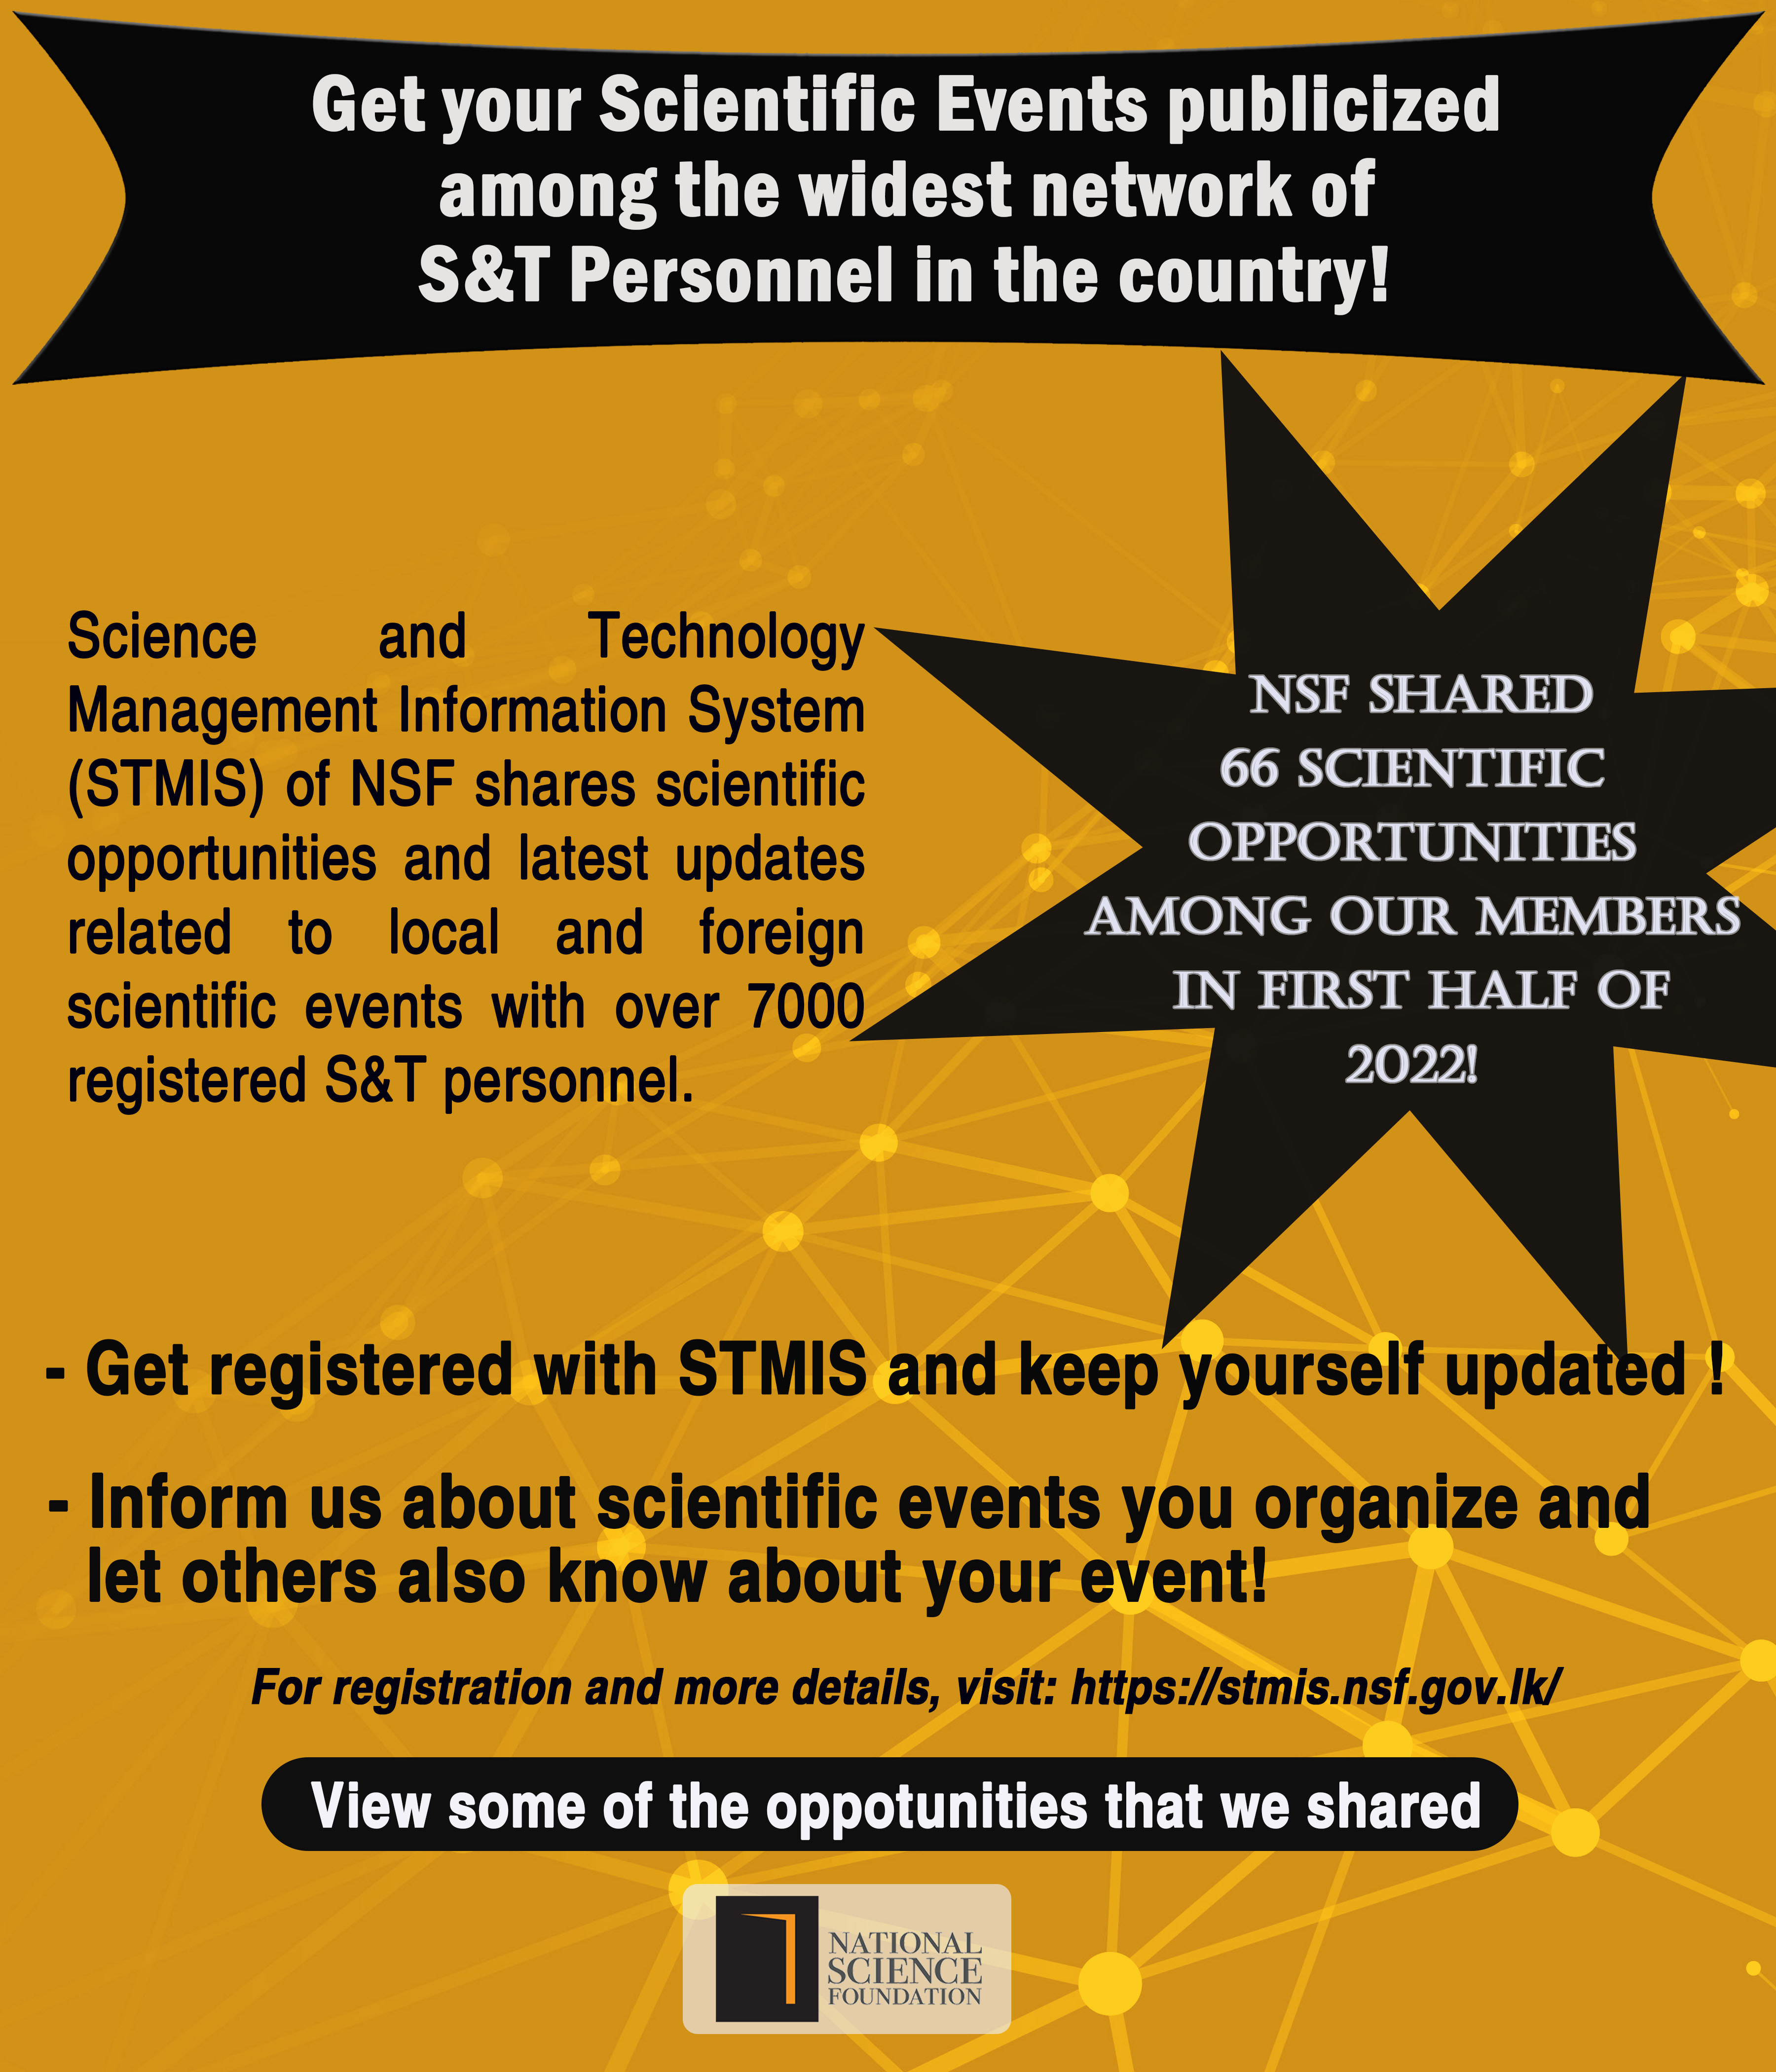 Get your Scientific Events publicized among the widest S & T network